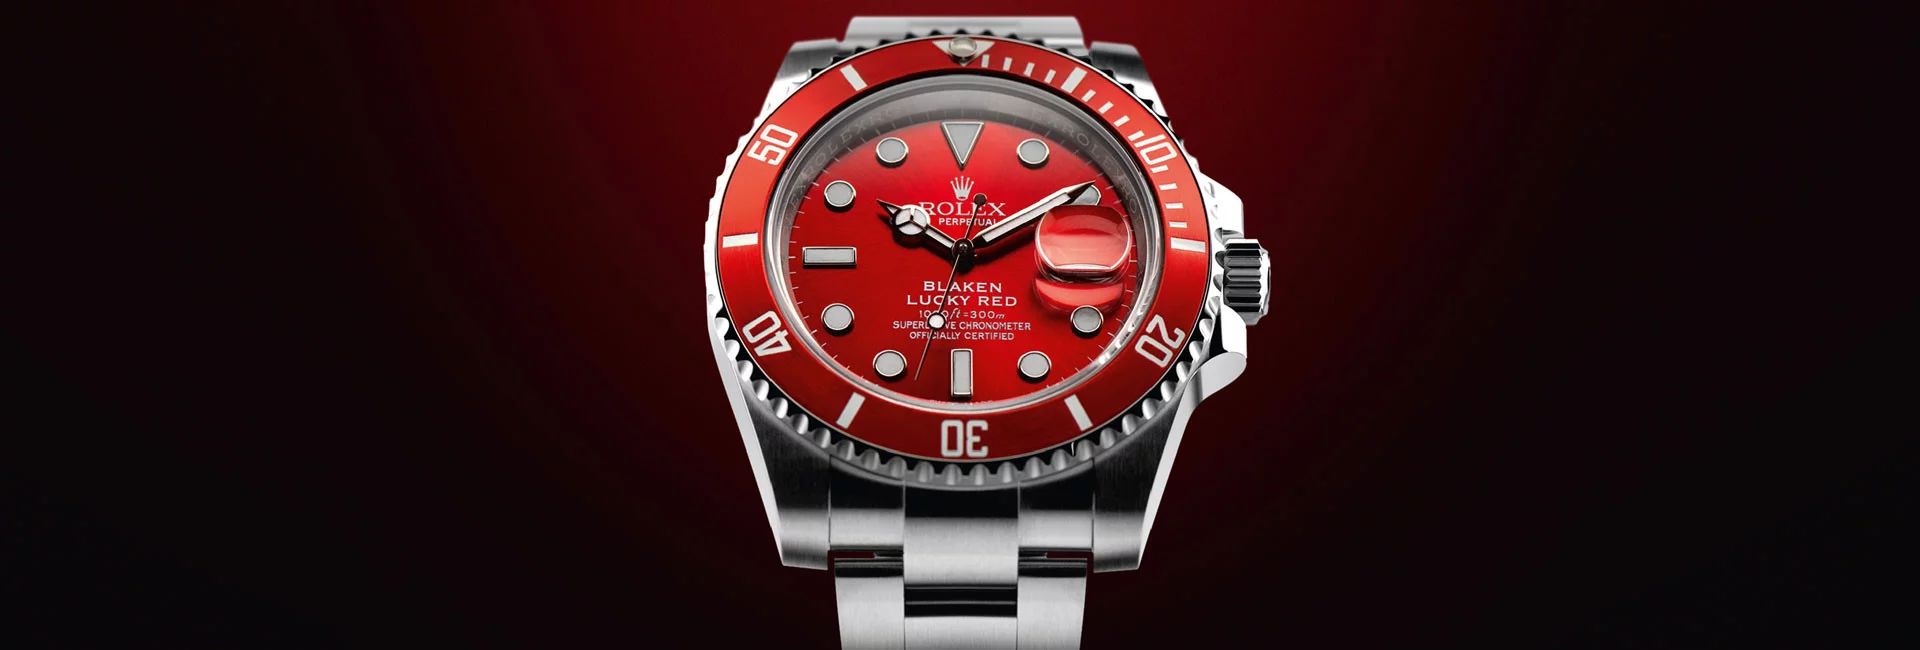 Rolex PAN AM GMT-Master II Limited Edition by Blaken | Buy pre-owned Rolex  watch